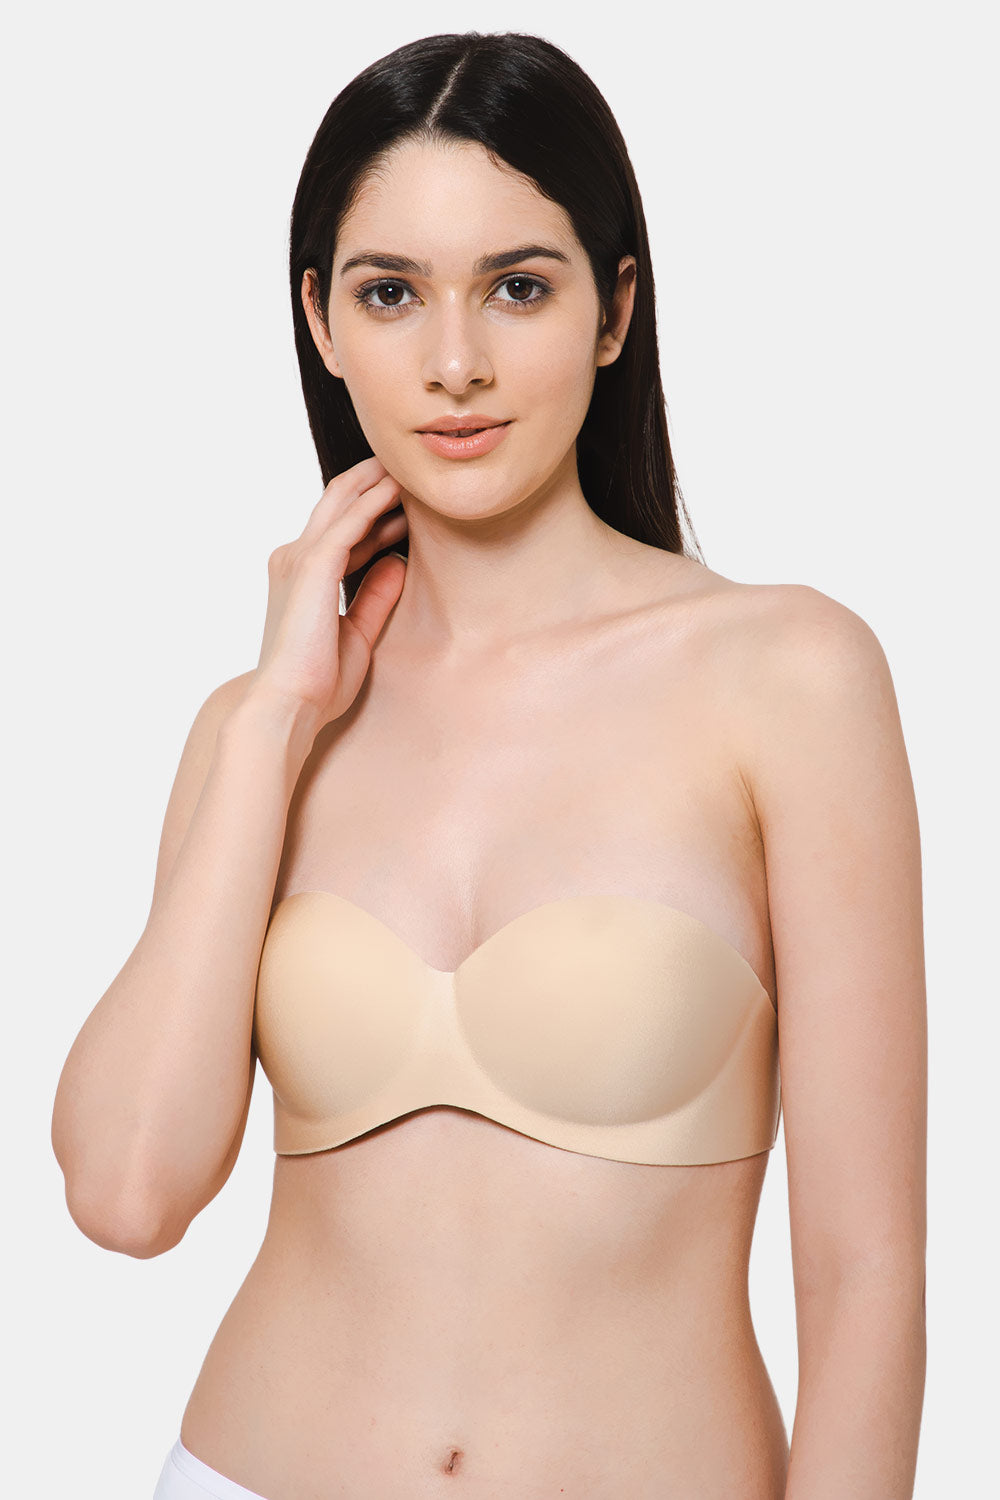 Buy FASHION BONES Premium Cotton Non Padded Full Coverage Bra for Women and  Teenage Girls for Daily Use